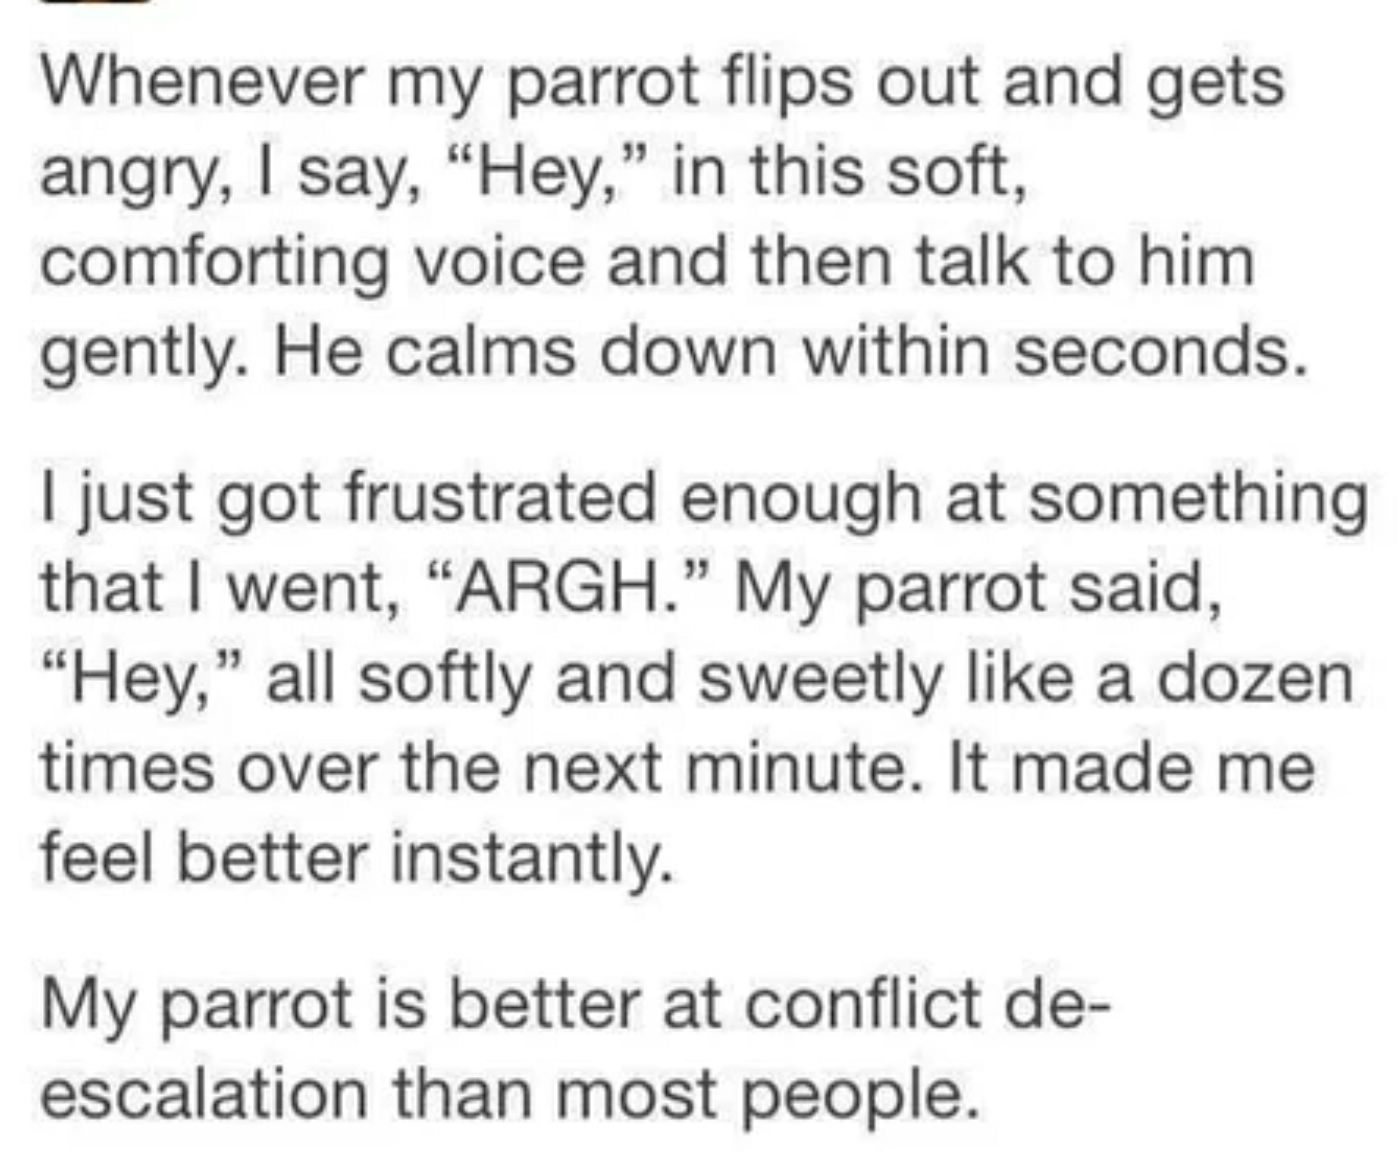 handwriting - Whenever my parrot flips out and gets angry, I say, "Hey," in this soft, comforting voice and then talk to him gently. He calms down within seconds. I just got frustrated enough at something that I went, "Argh. My parrot said, "Hey," all sof